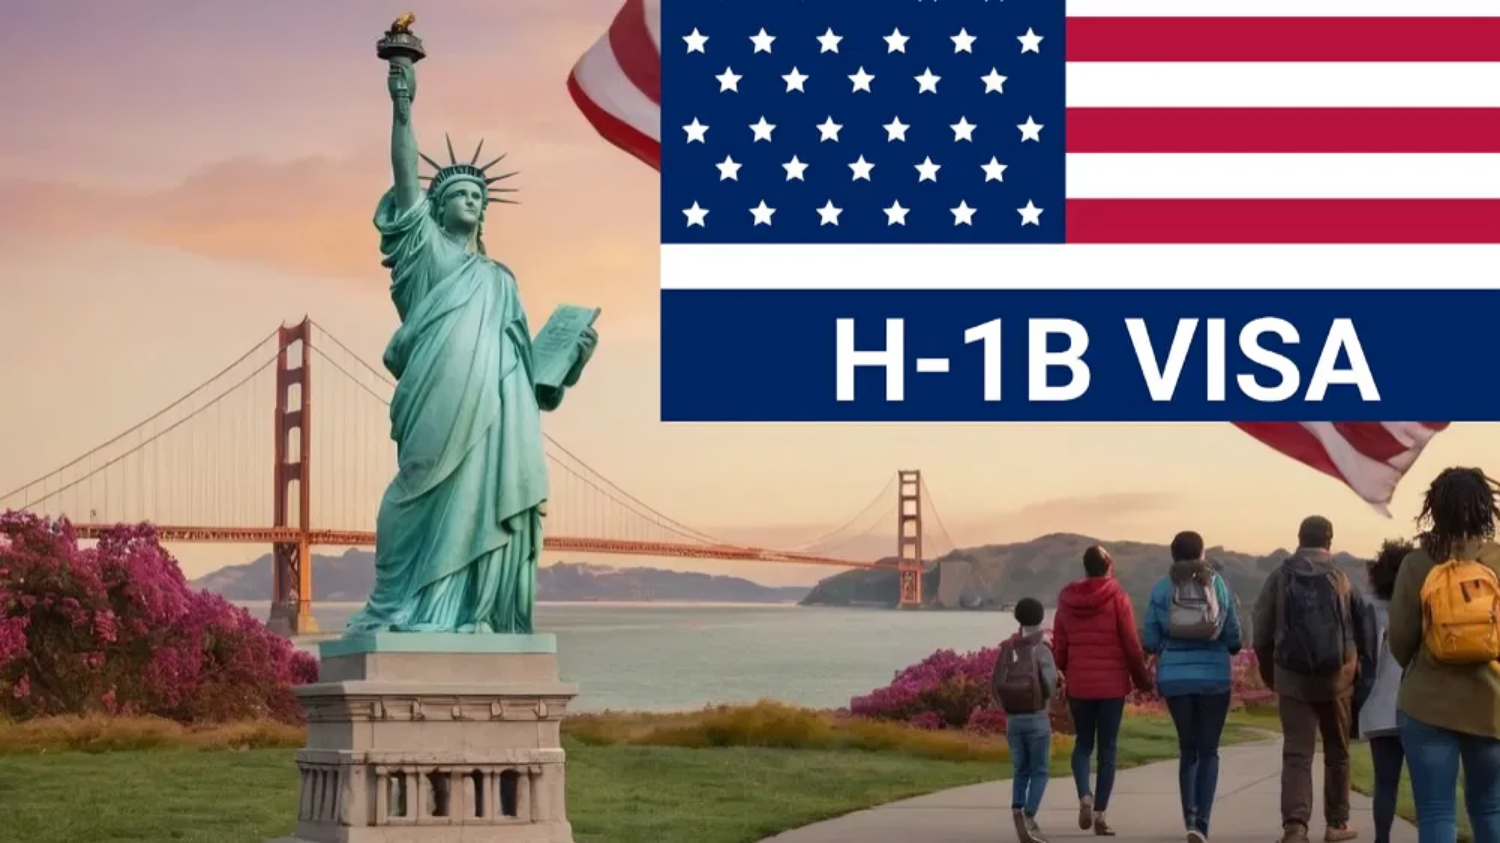 Special news for people going to US, H-1B visa registration will be closed soon, apply like this की तस्वीर